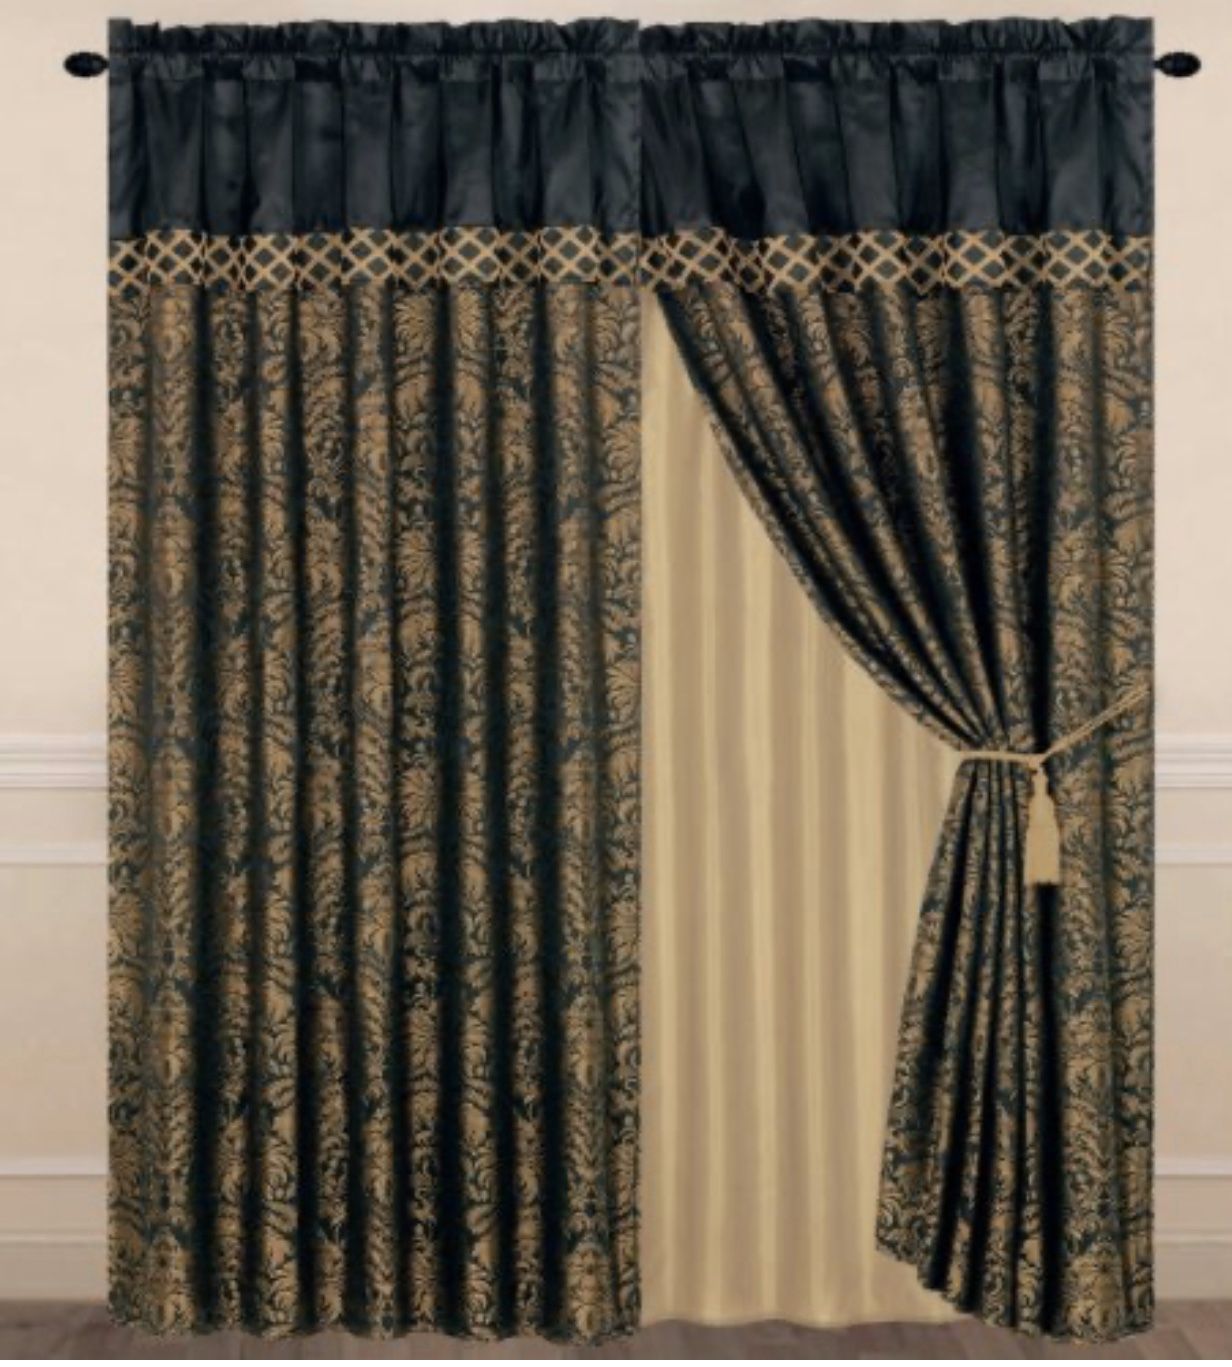 2 Panel Jacquard Floral Window Curtain Set with Sheer Backing and Tassels Valance - Black and Gold